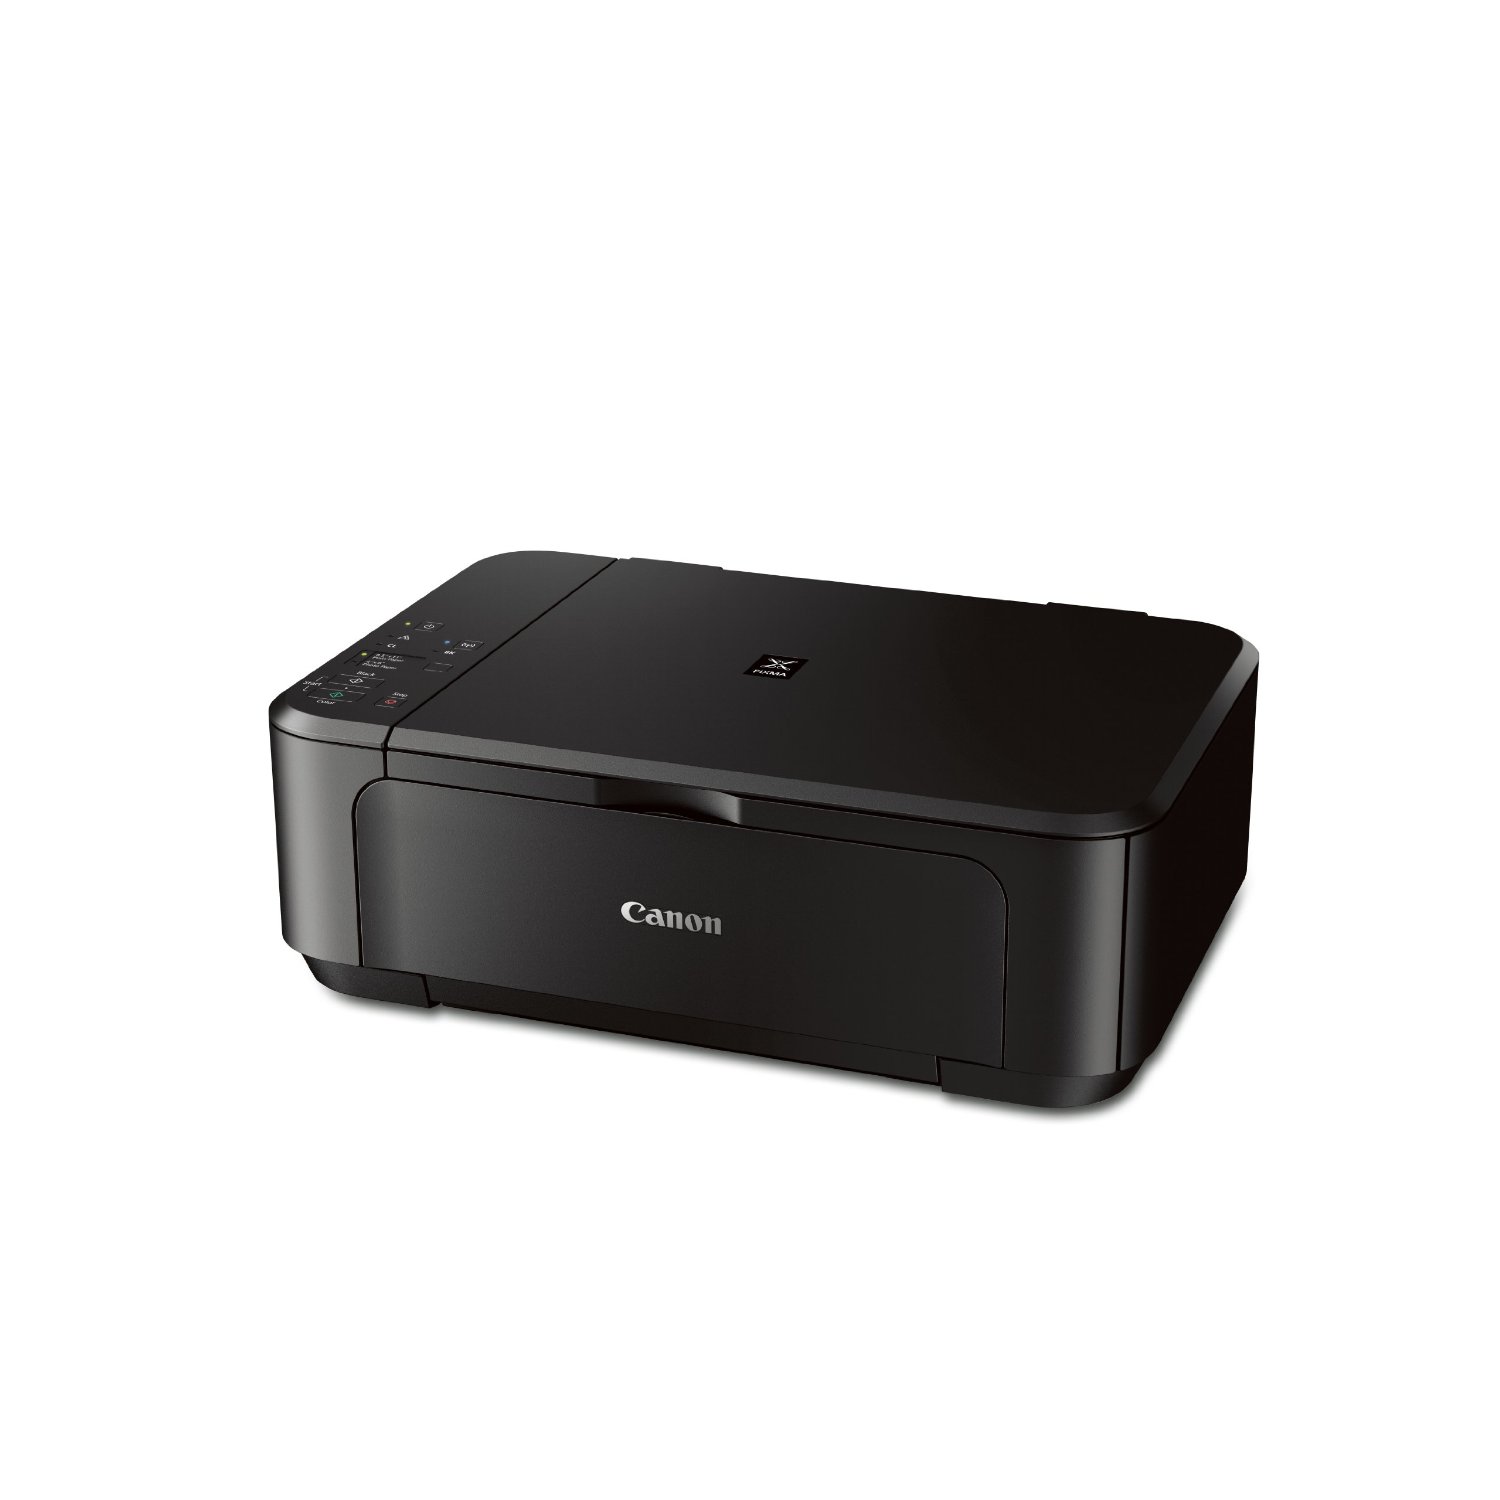 Canon Pixma Mg3520 Wireless Color Printer With Scanner And Copier Free Image Download 0705